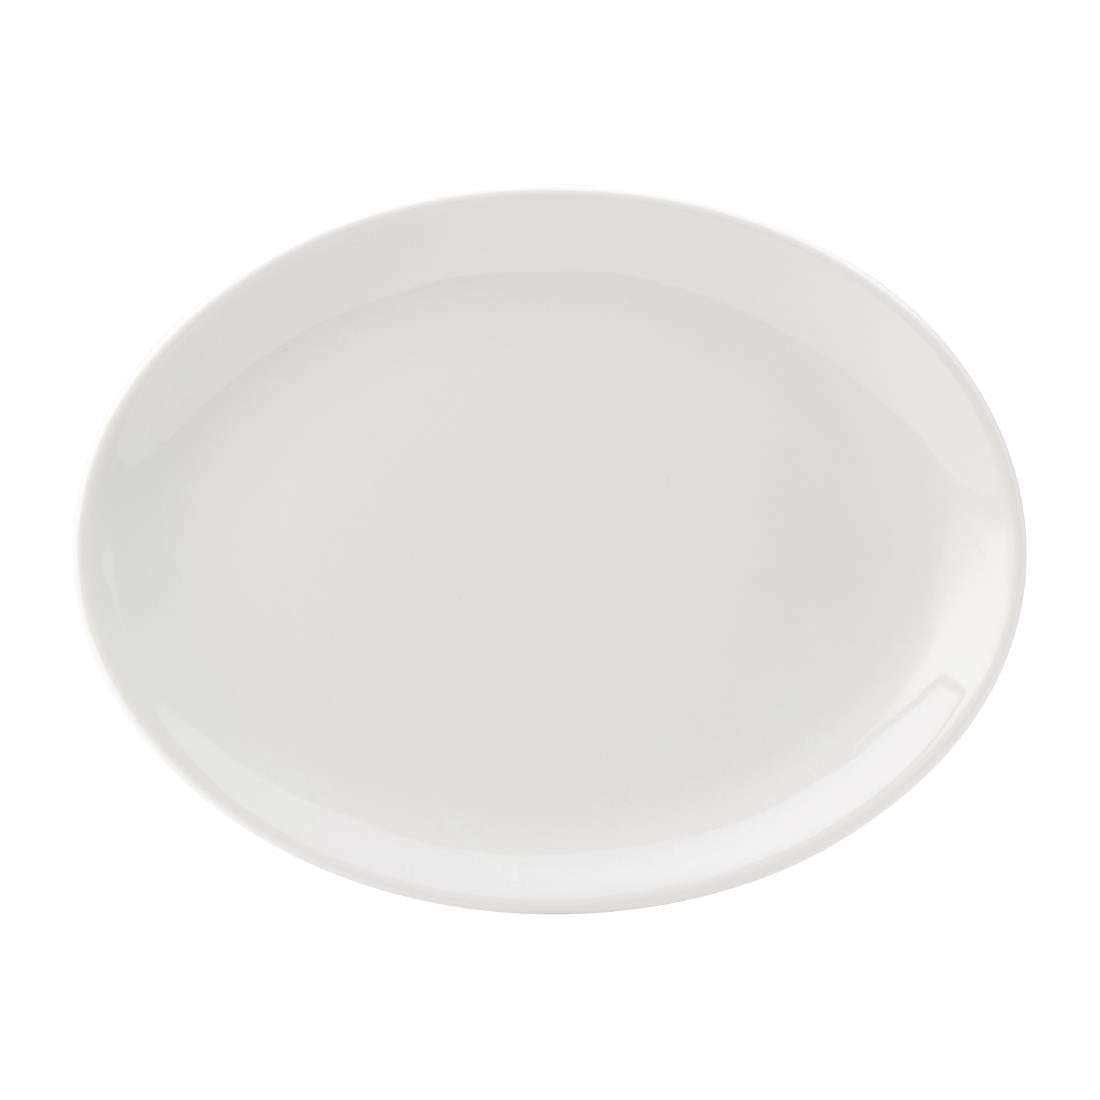 DY324 Utopia Titan Oval Plates White 240mm (Pack of 24)